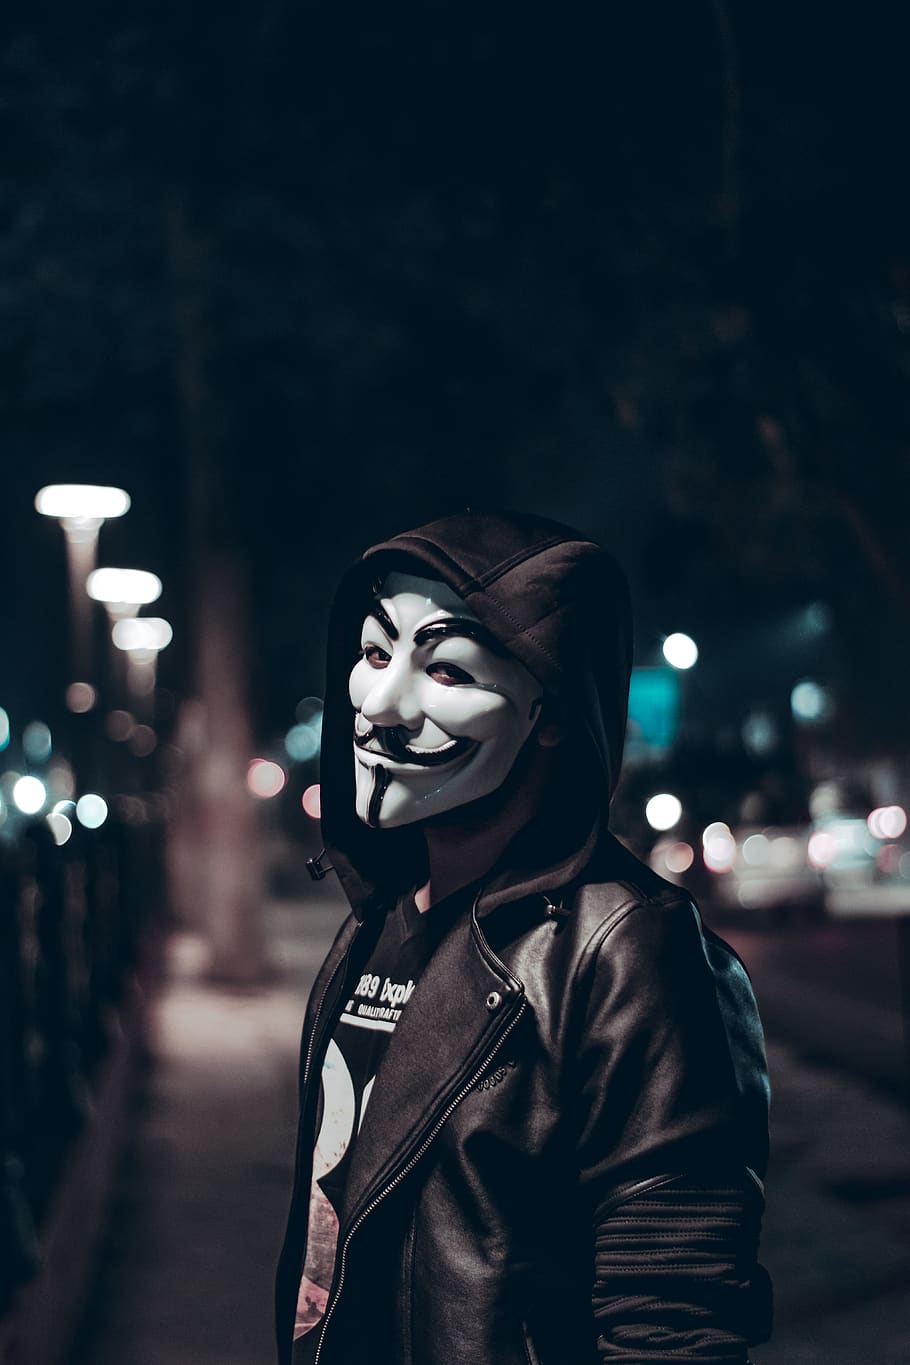 Person Wearing Guy Fawkes Mask, black leather jacket, blur, city lights